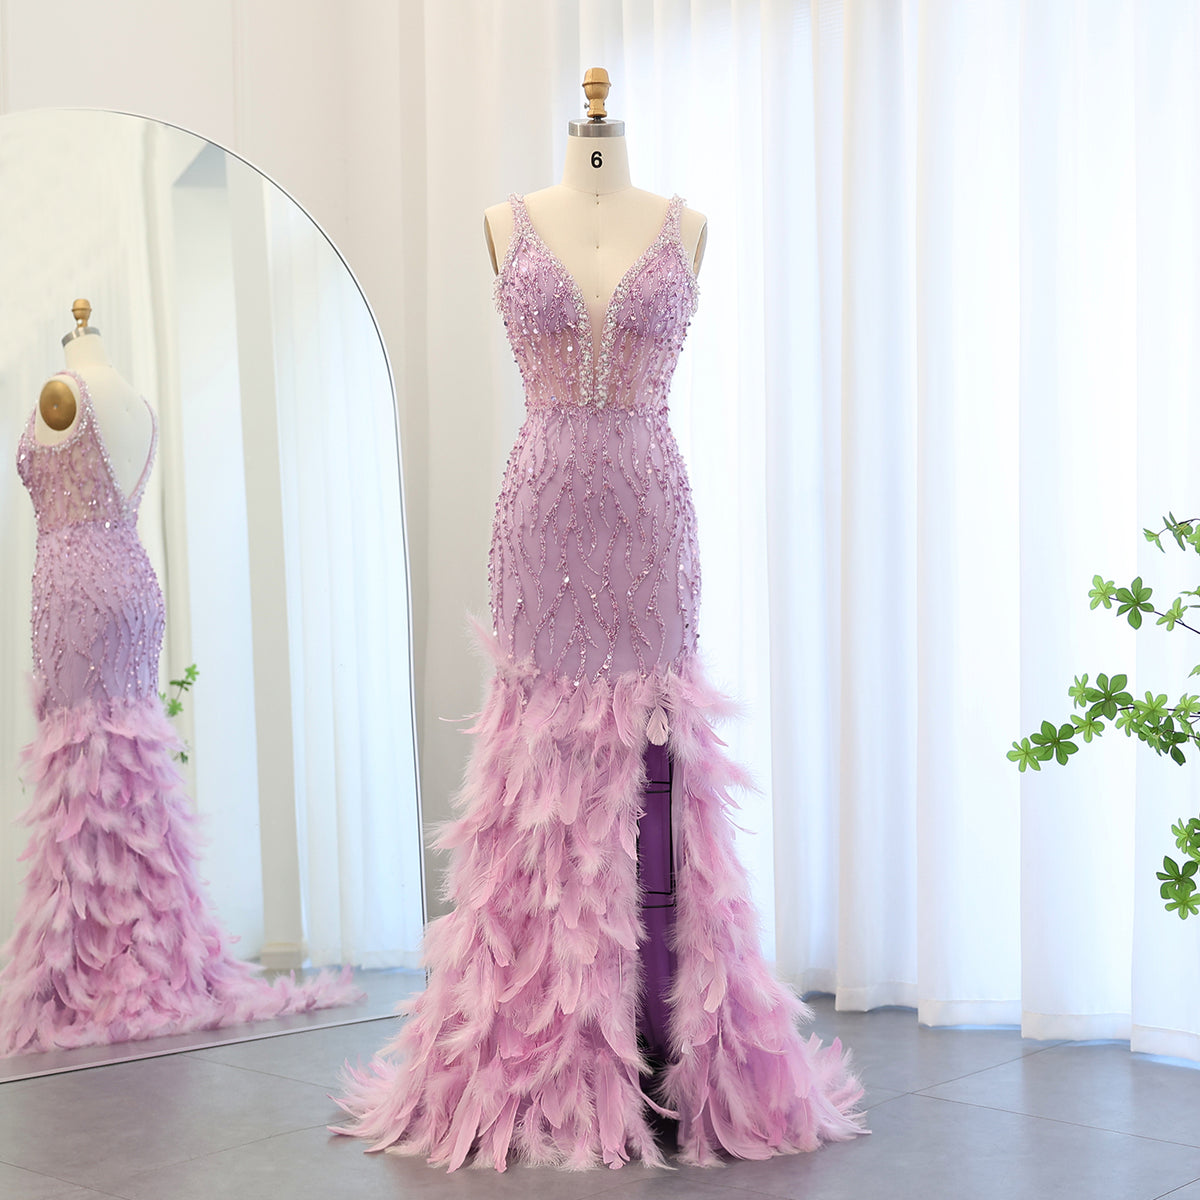 Sharon Said Luxury Feathers Pink Mermaid Evening Dresses for Women Wedding V-Neck Blue Side Slit Long Prom Party Dress SS184